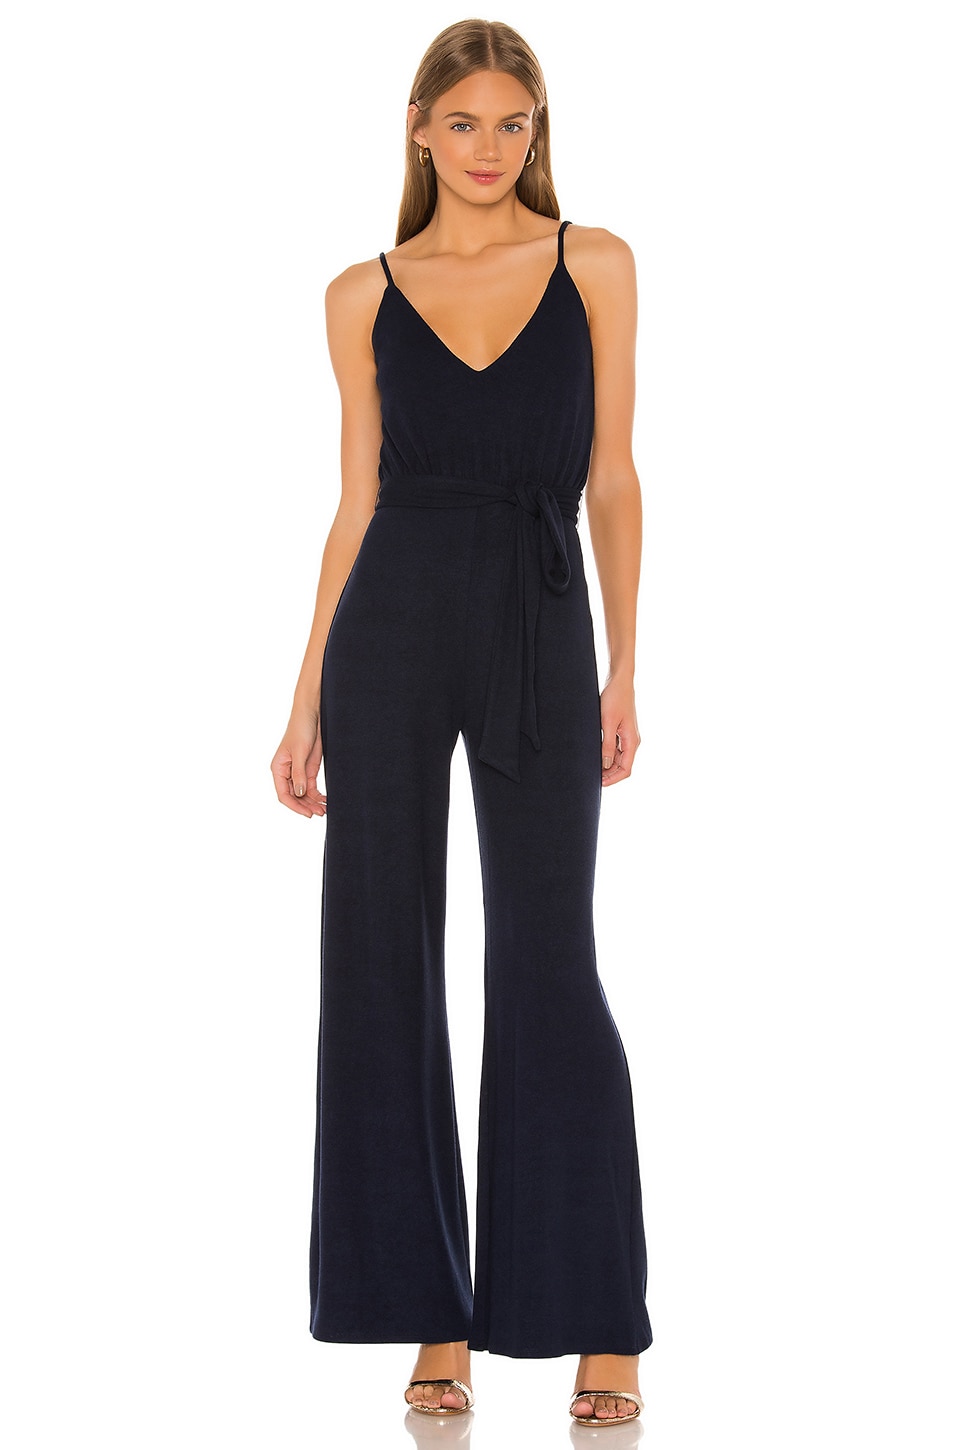 Lovers and Friends Arabella Jumpsuit in Navy | REVOLVE